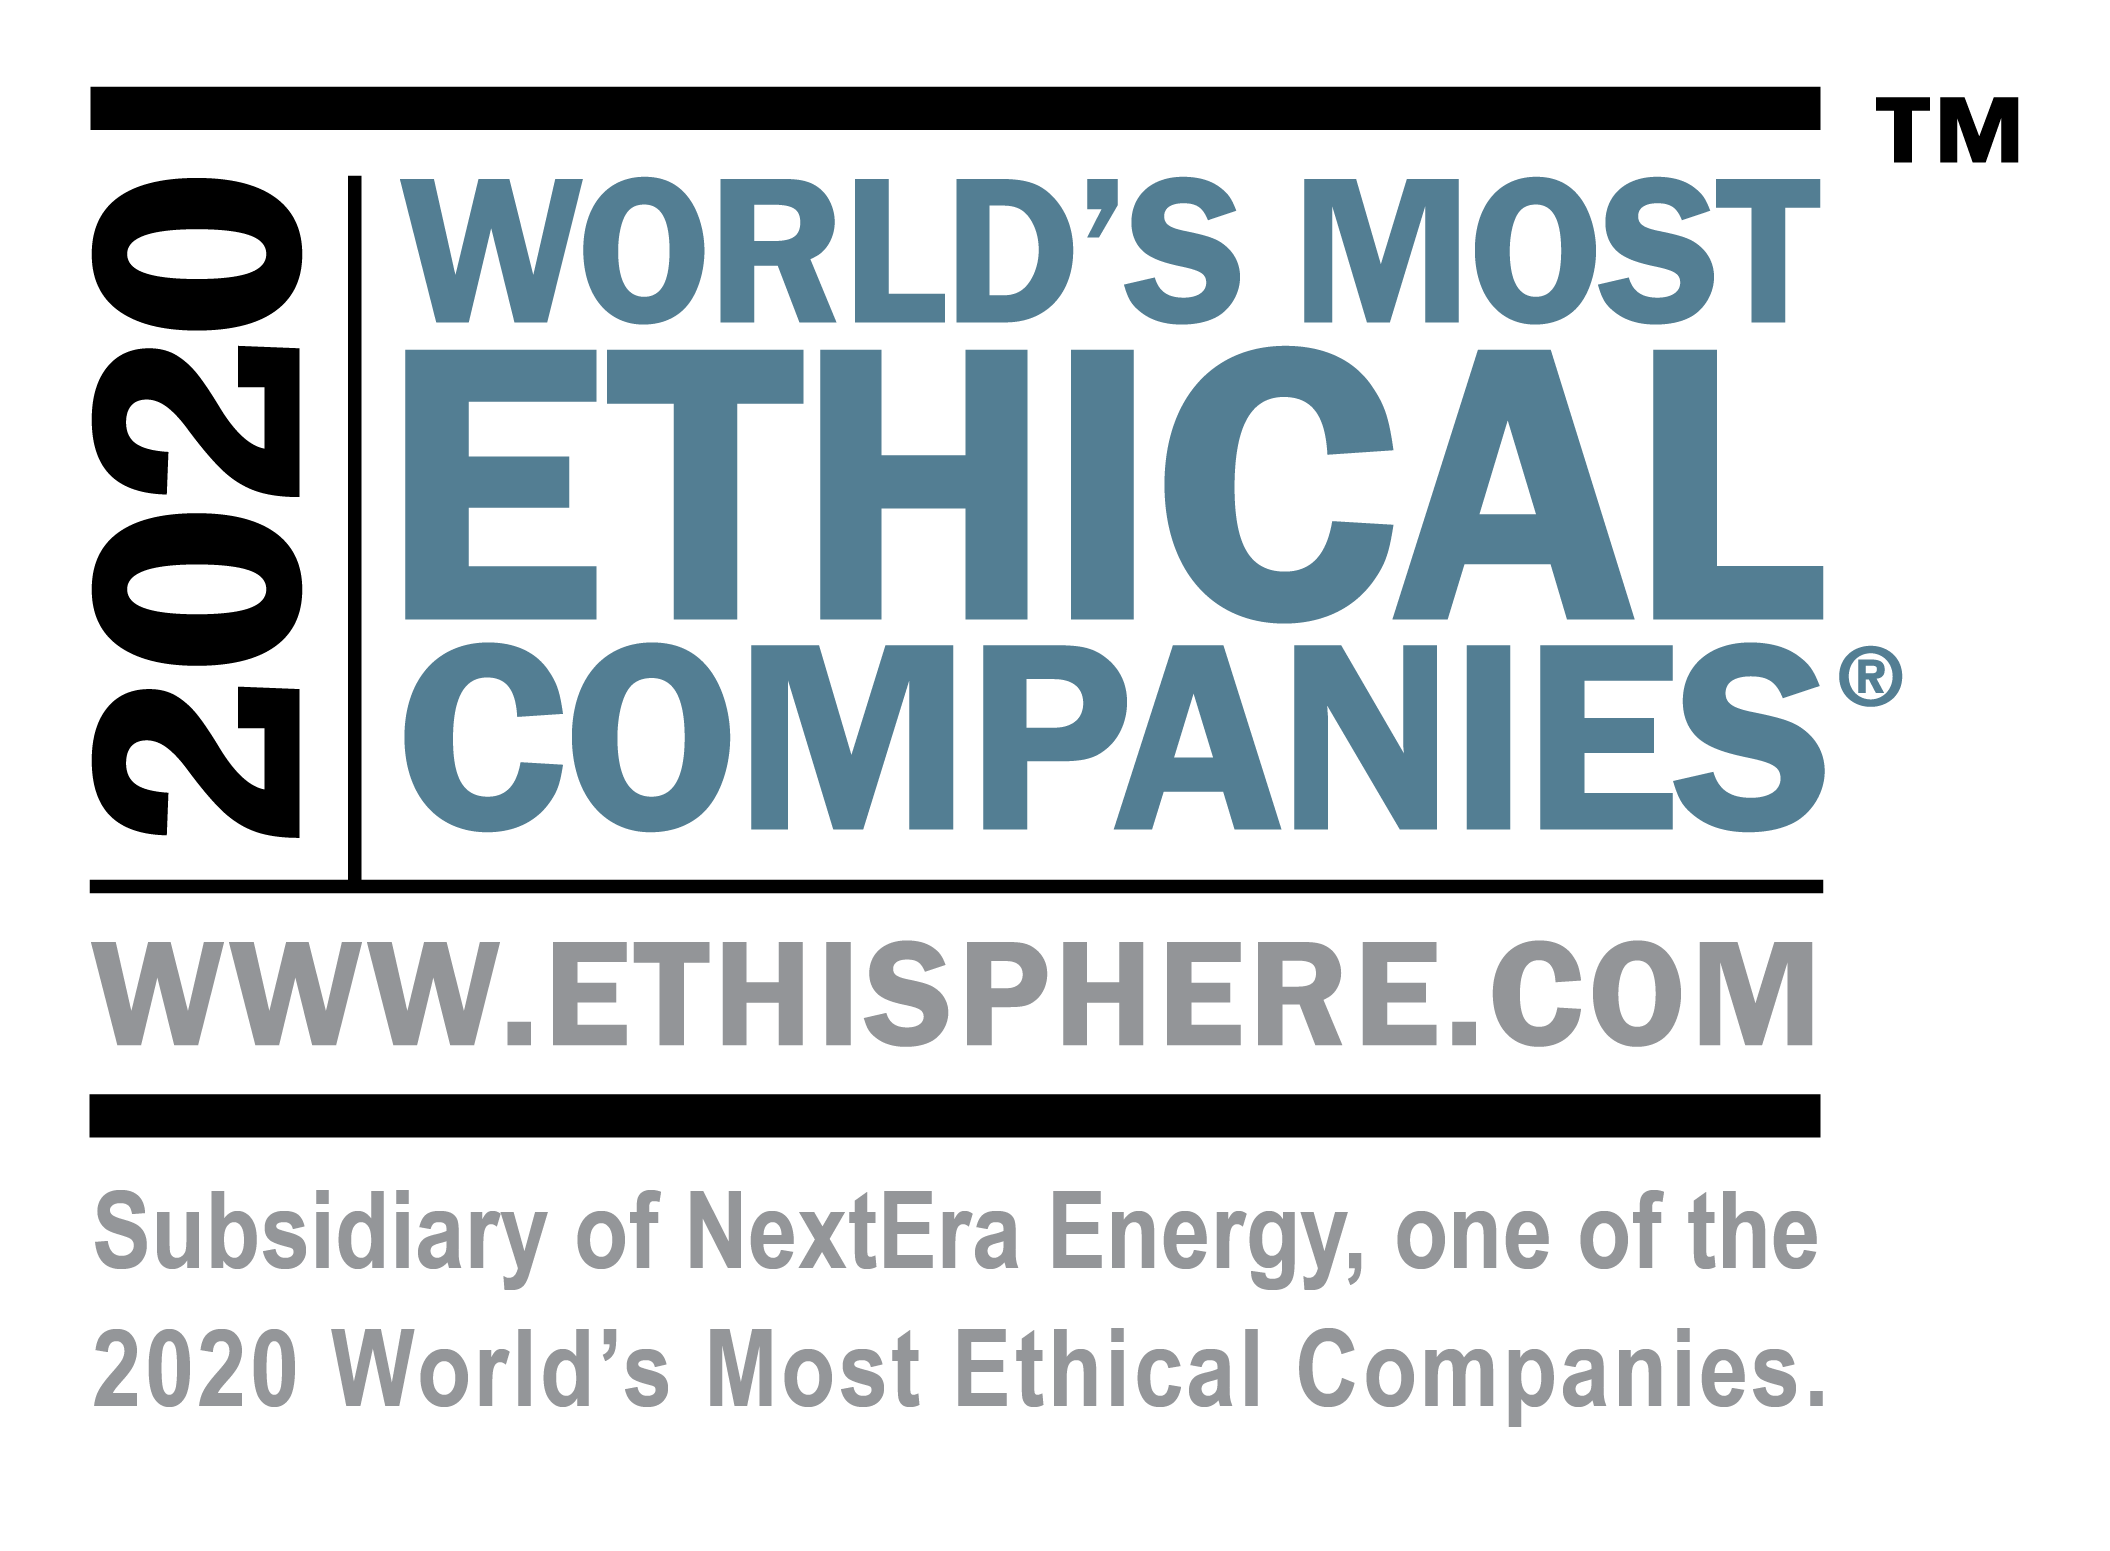 Subsidiary of NextEra Energy, one of the 2020 World's most ethical companies.